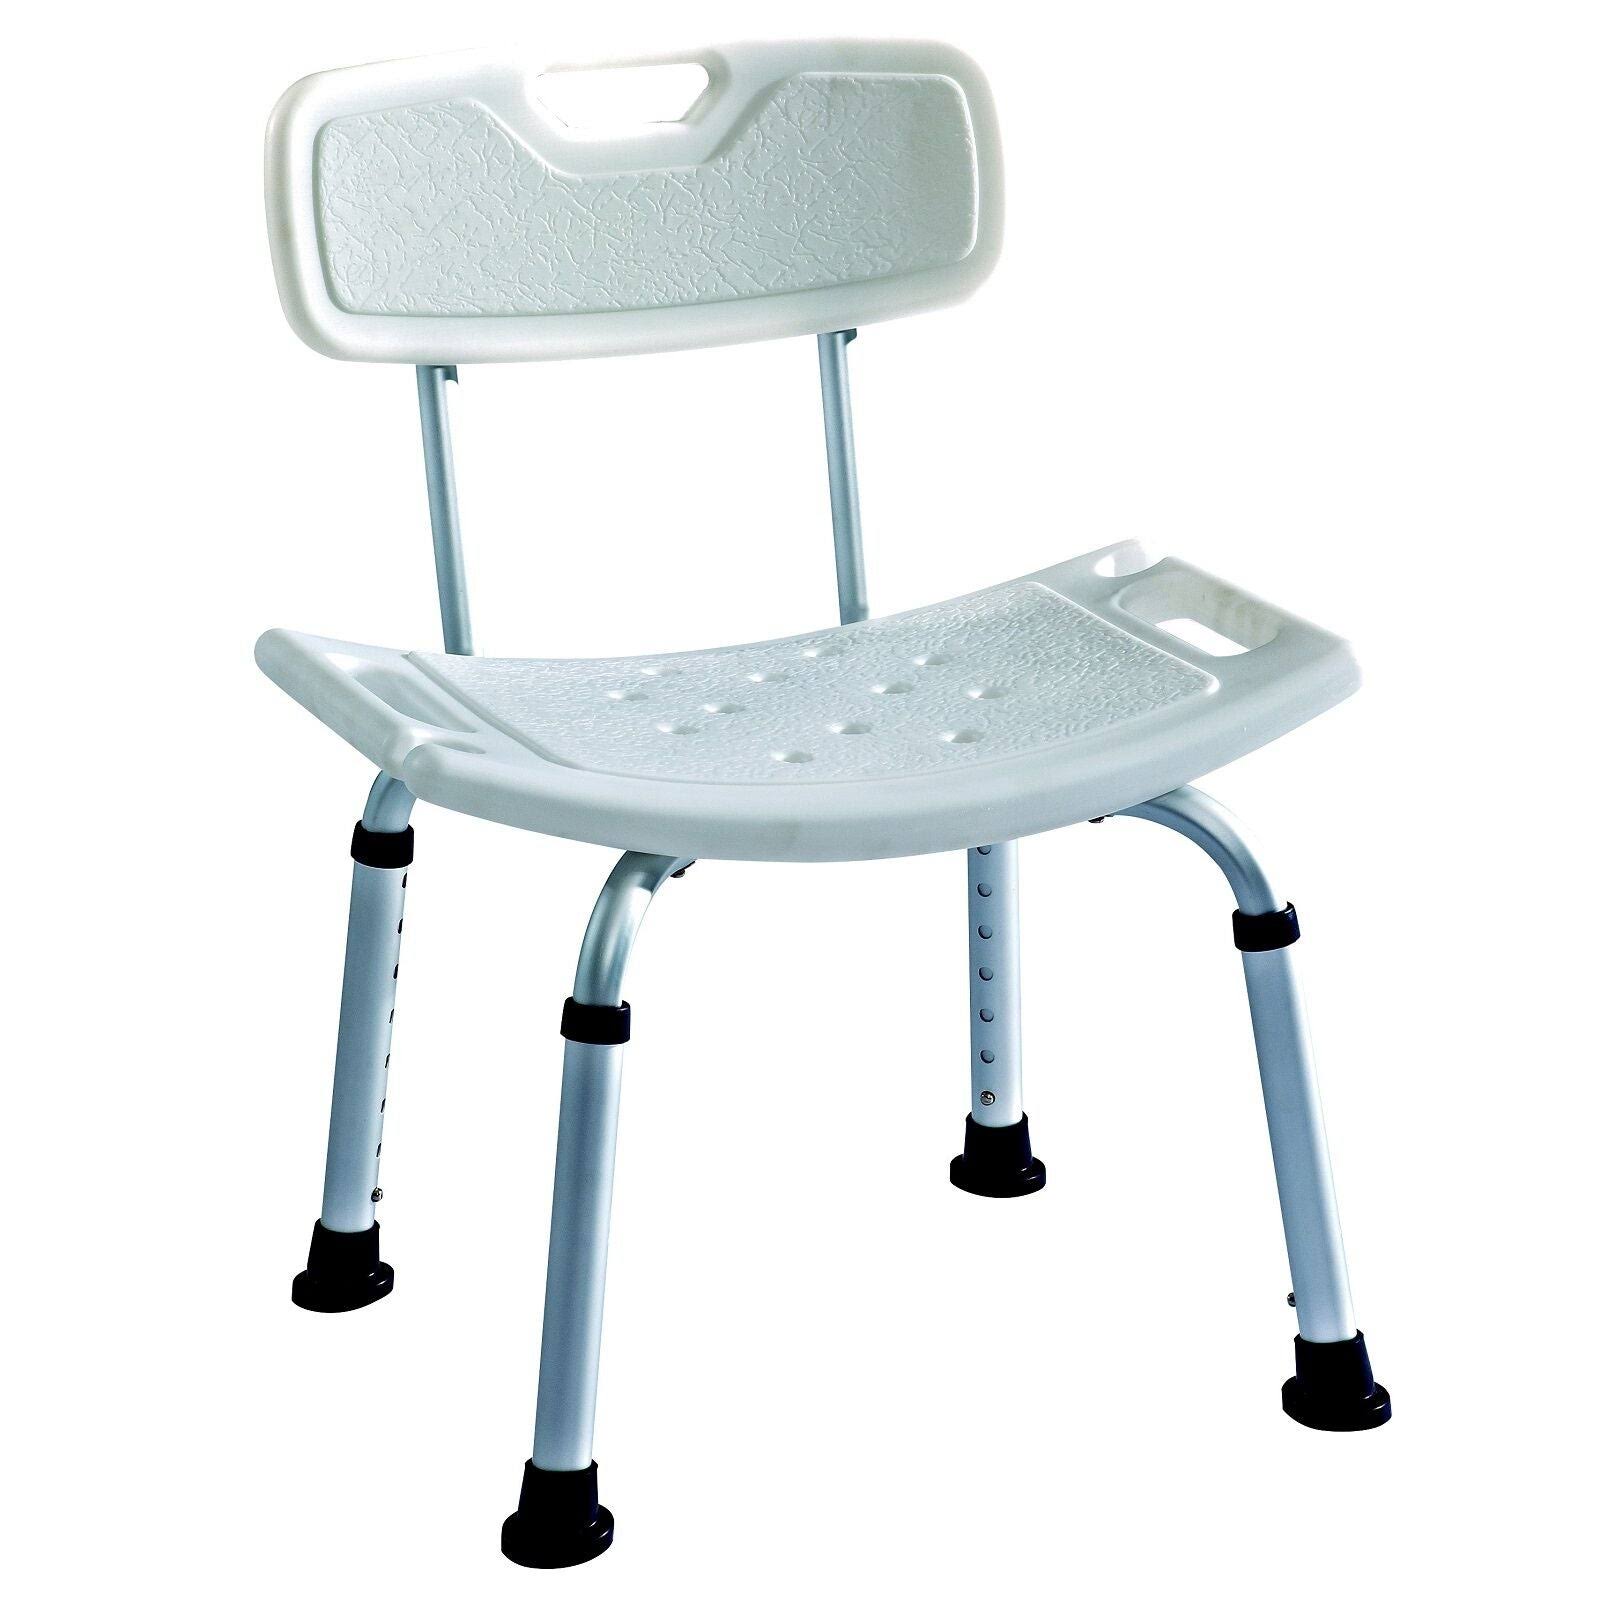 Drive Medical Plastic Freestanding Shower Seat - Gray, with Back Rest